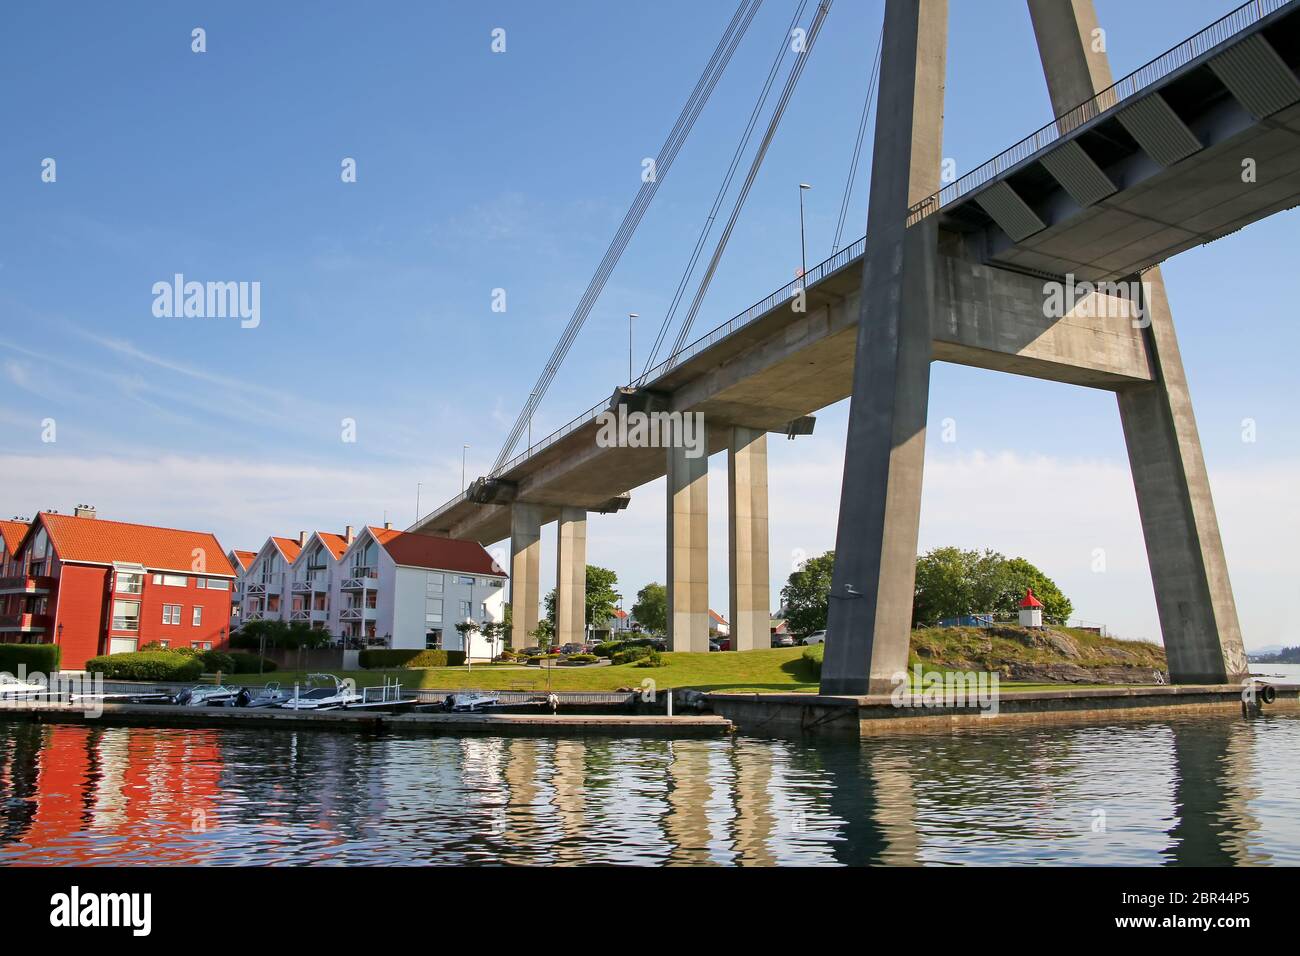 Stavanger City Bridge is a cable-stayed bridge in the city of Stavanger in Rogaland county, Norway. The bridge crosses the Straumsteinsundet strait. Stock Photo